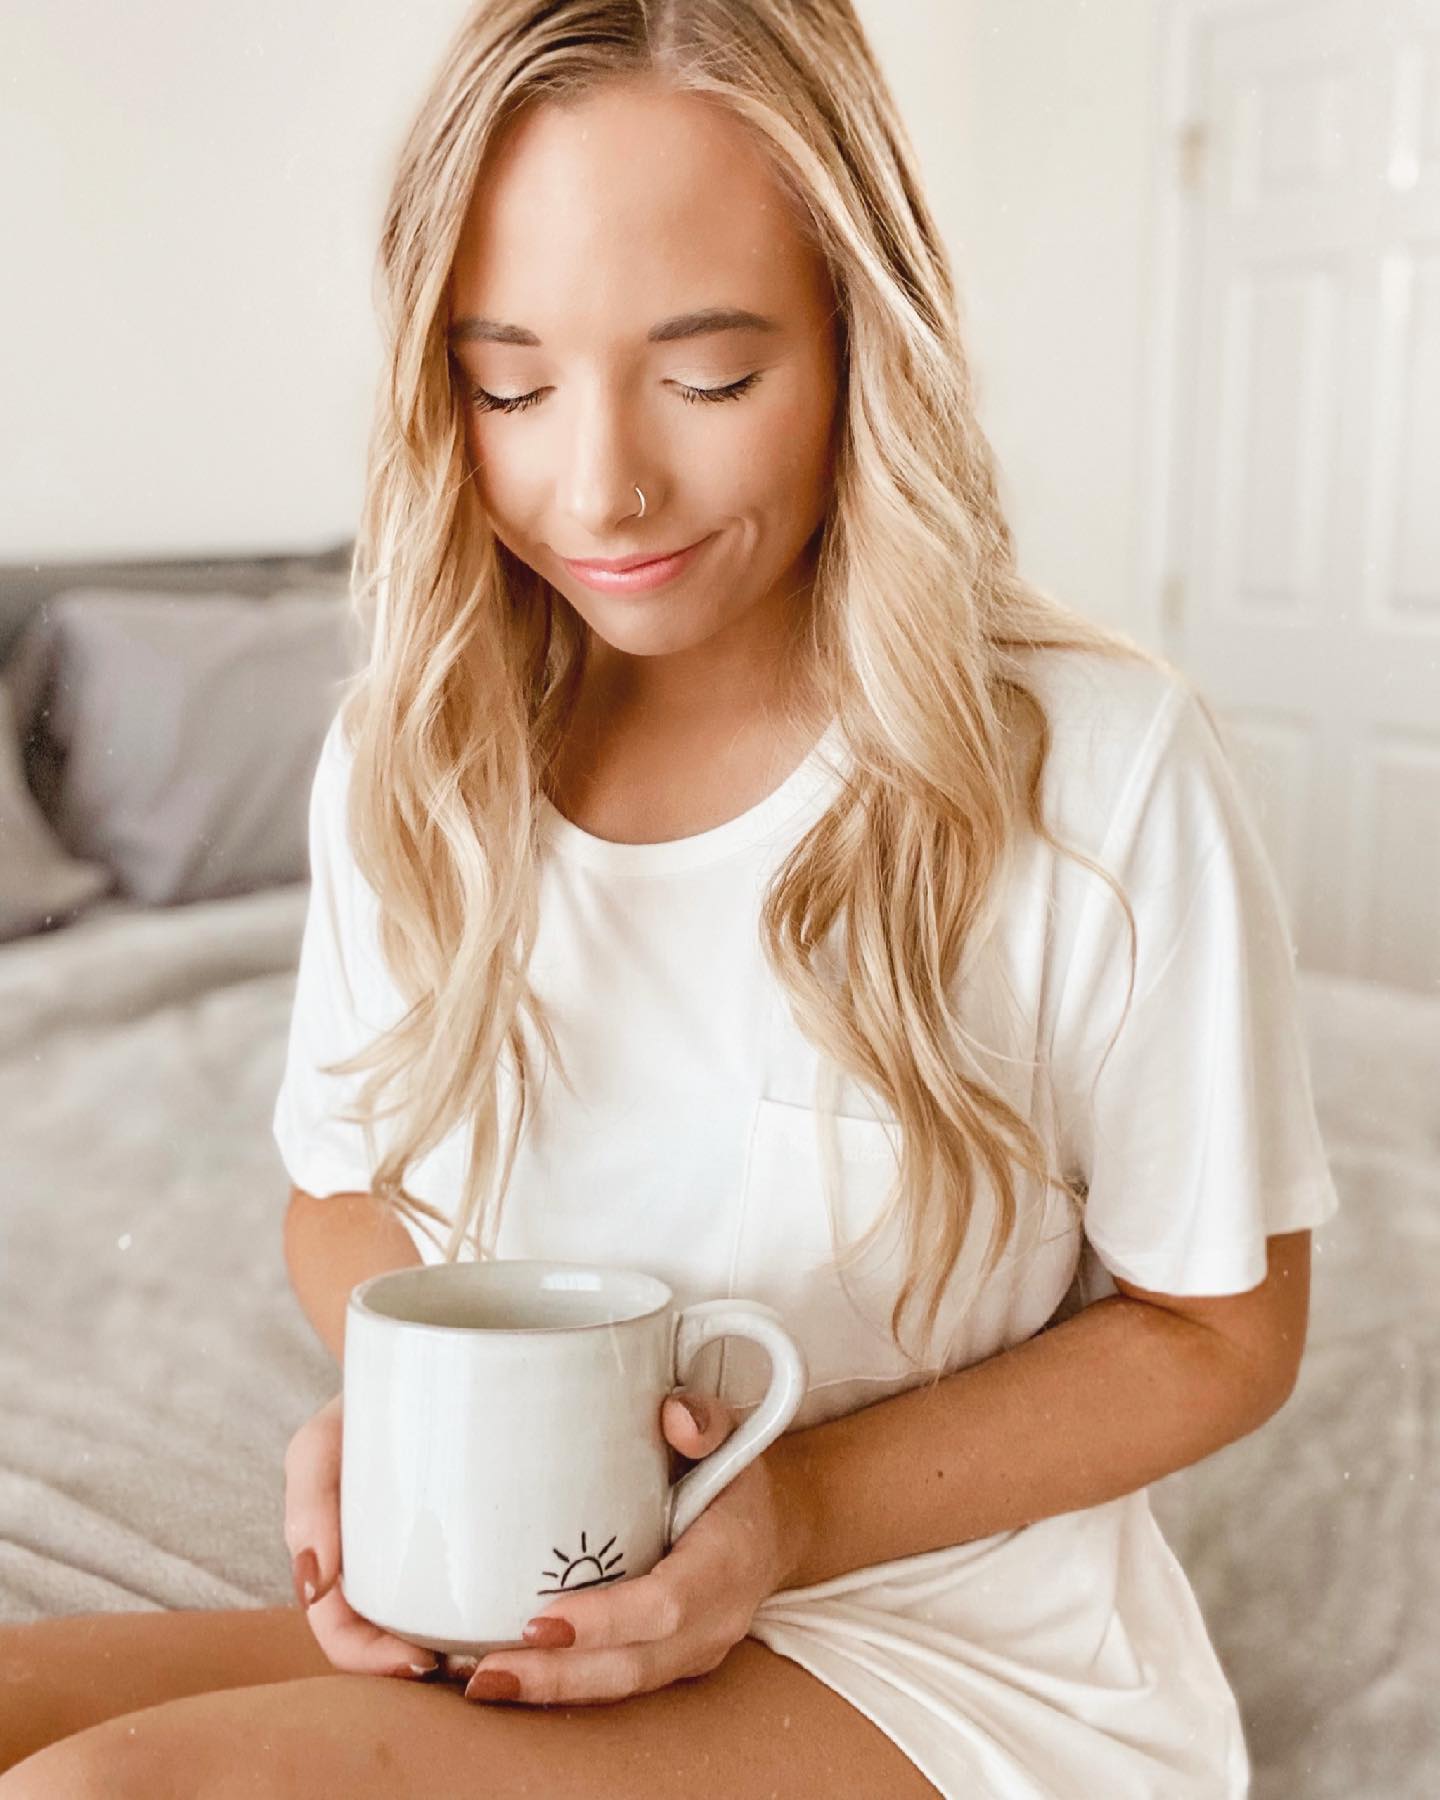 Gift Guide: 50+ Gift Ideas For Moms - Coffee With Summer